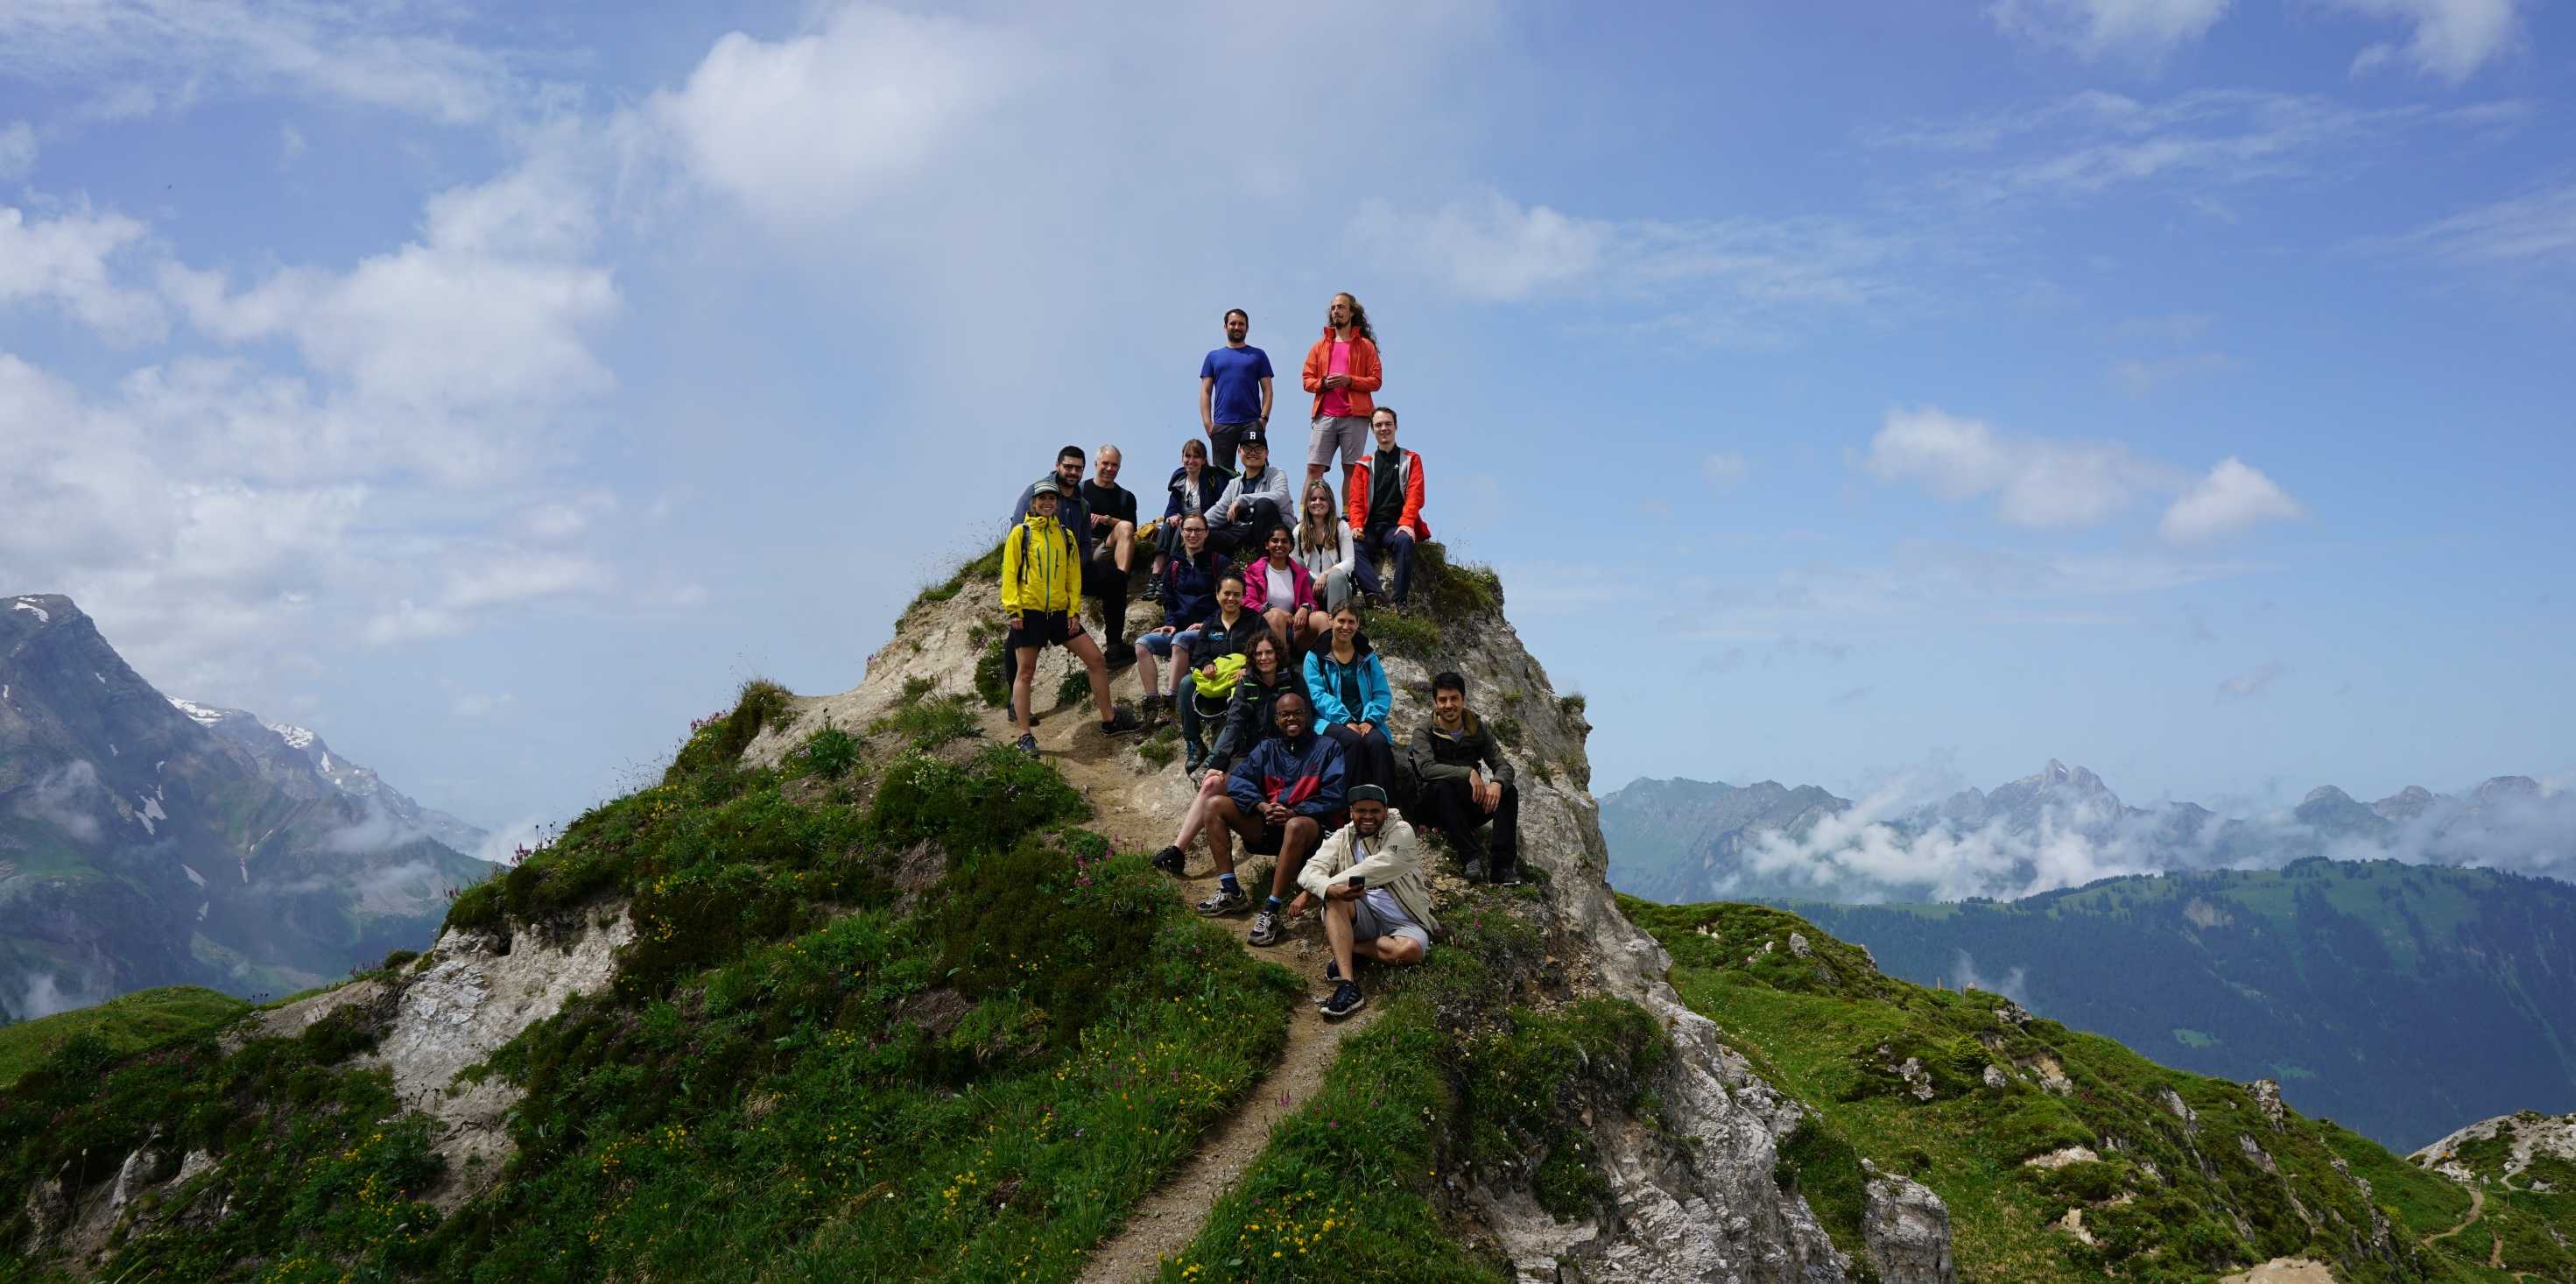 Enlarged view: Group members on top of a mountain some are standing others are sitting